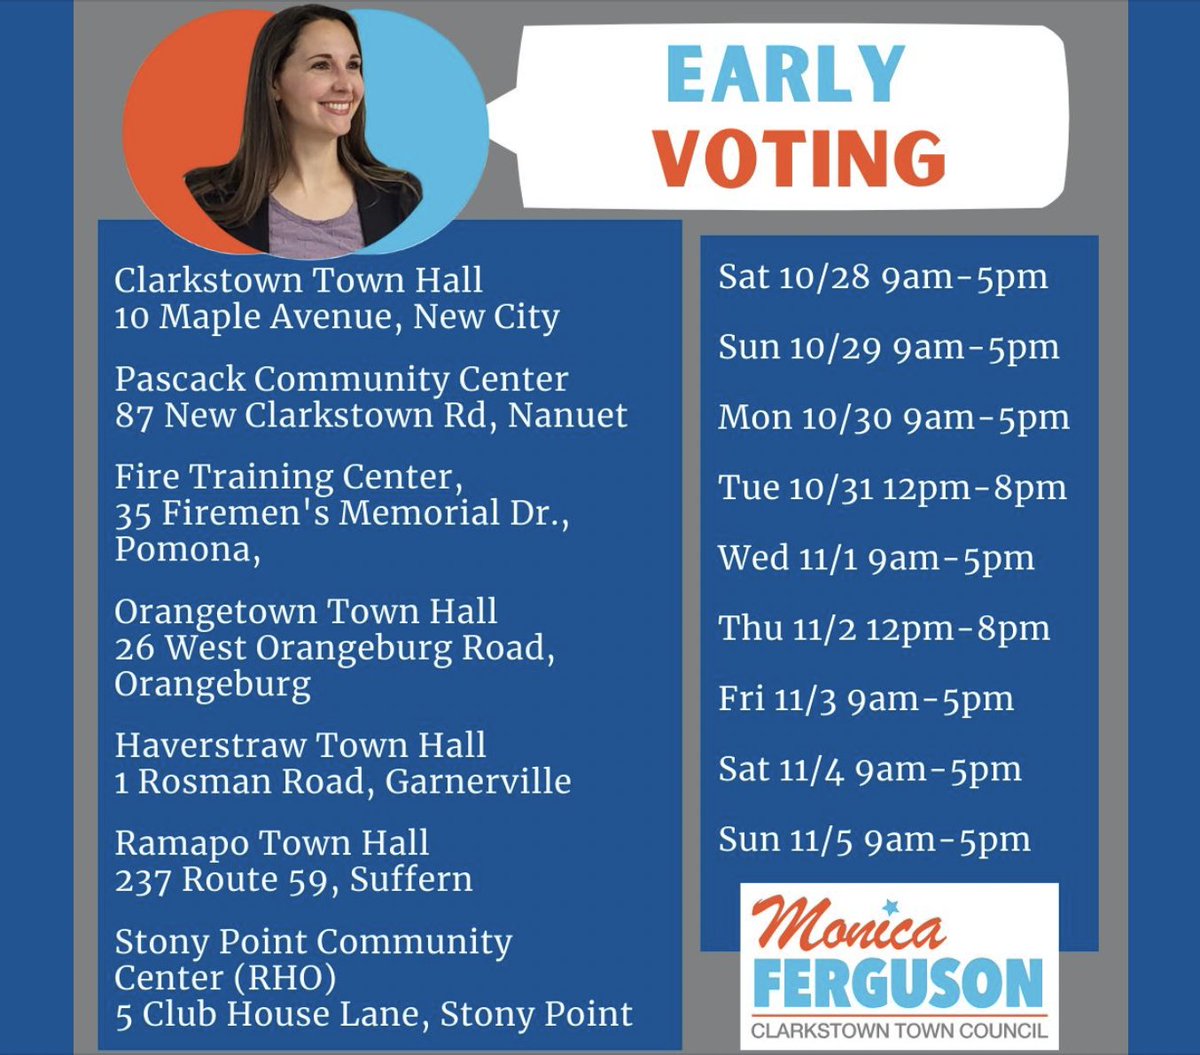 This is the LAST weekend of early voting times and locations are shown here. Election Day is November 7th Have questions? Link to learn more about me and my platform: ferguson4clarkstown.com #fergusonforclarkstown #ward1 #monicafortowncouncil #Clarkstown #NewCity